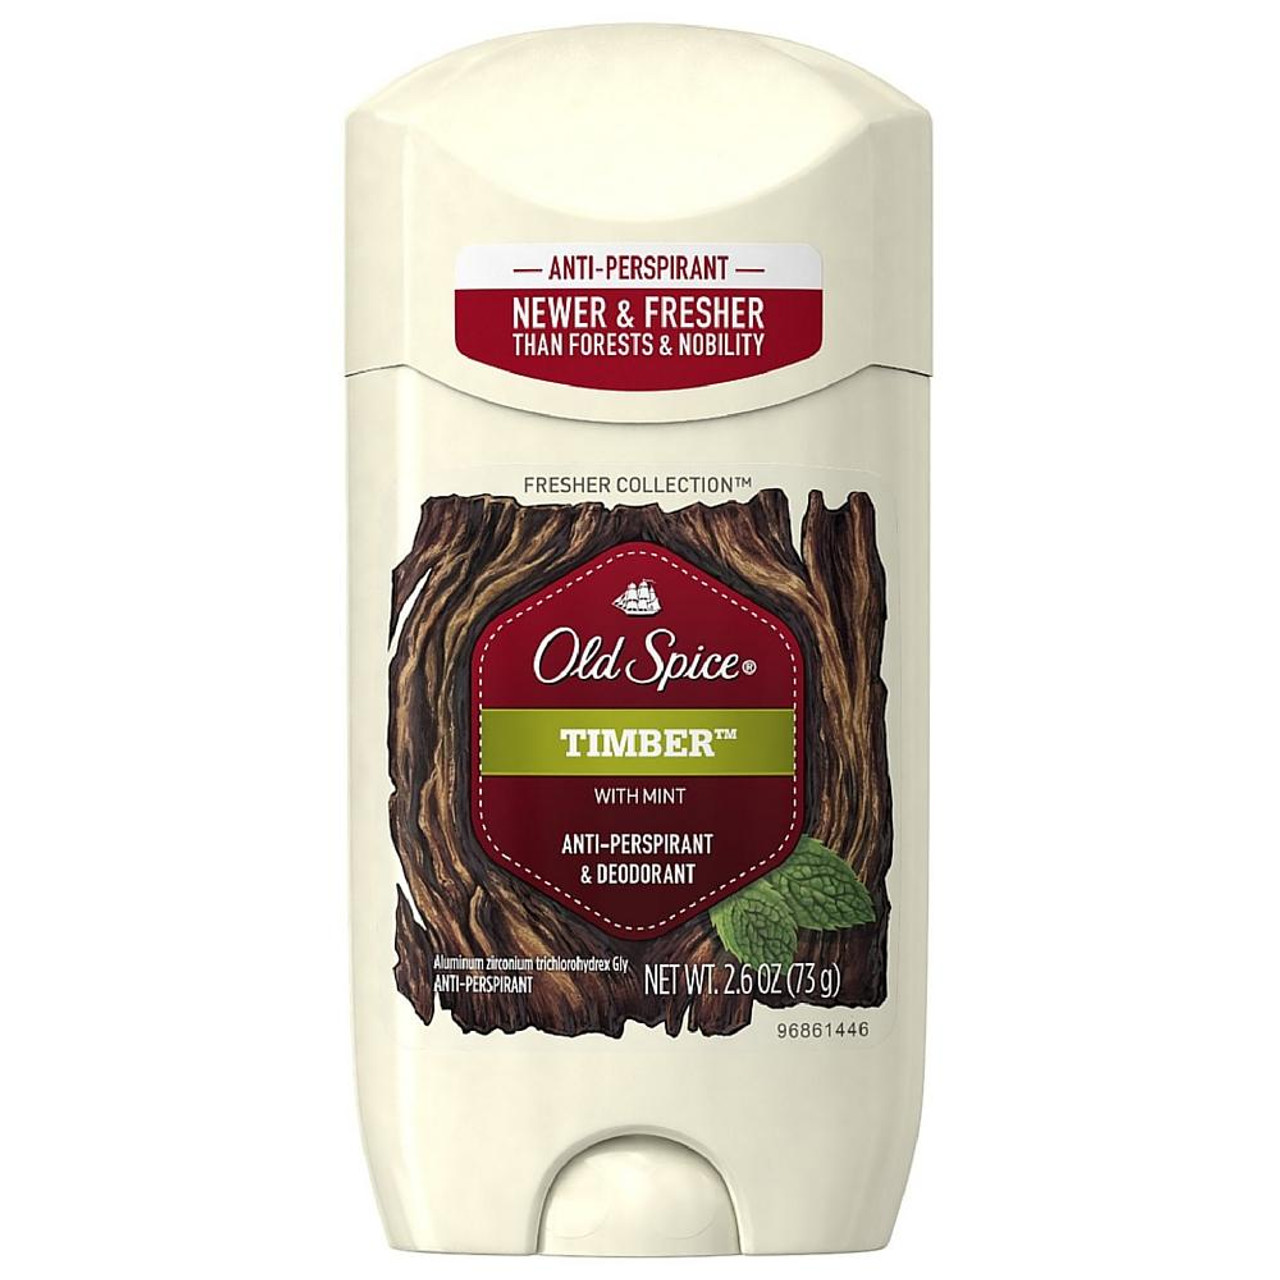 Old Spice Whitewater Wooden Box Set  Foto Pharmacy